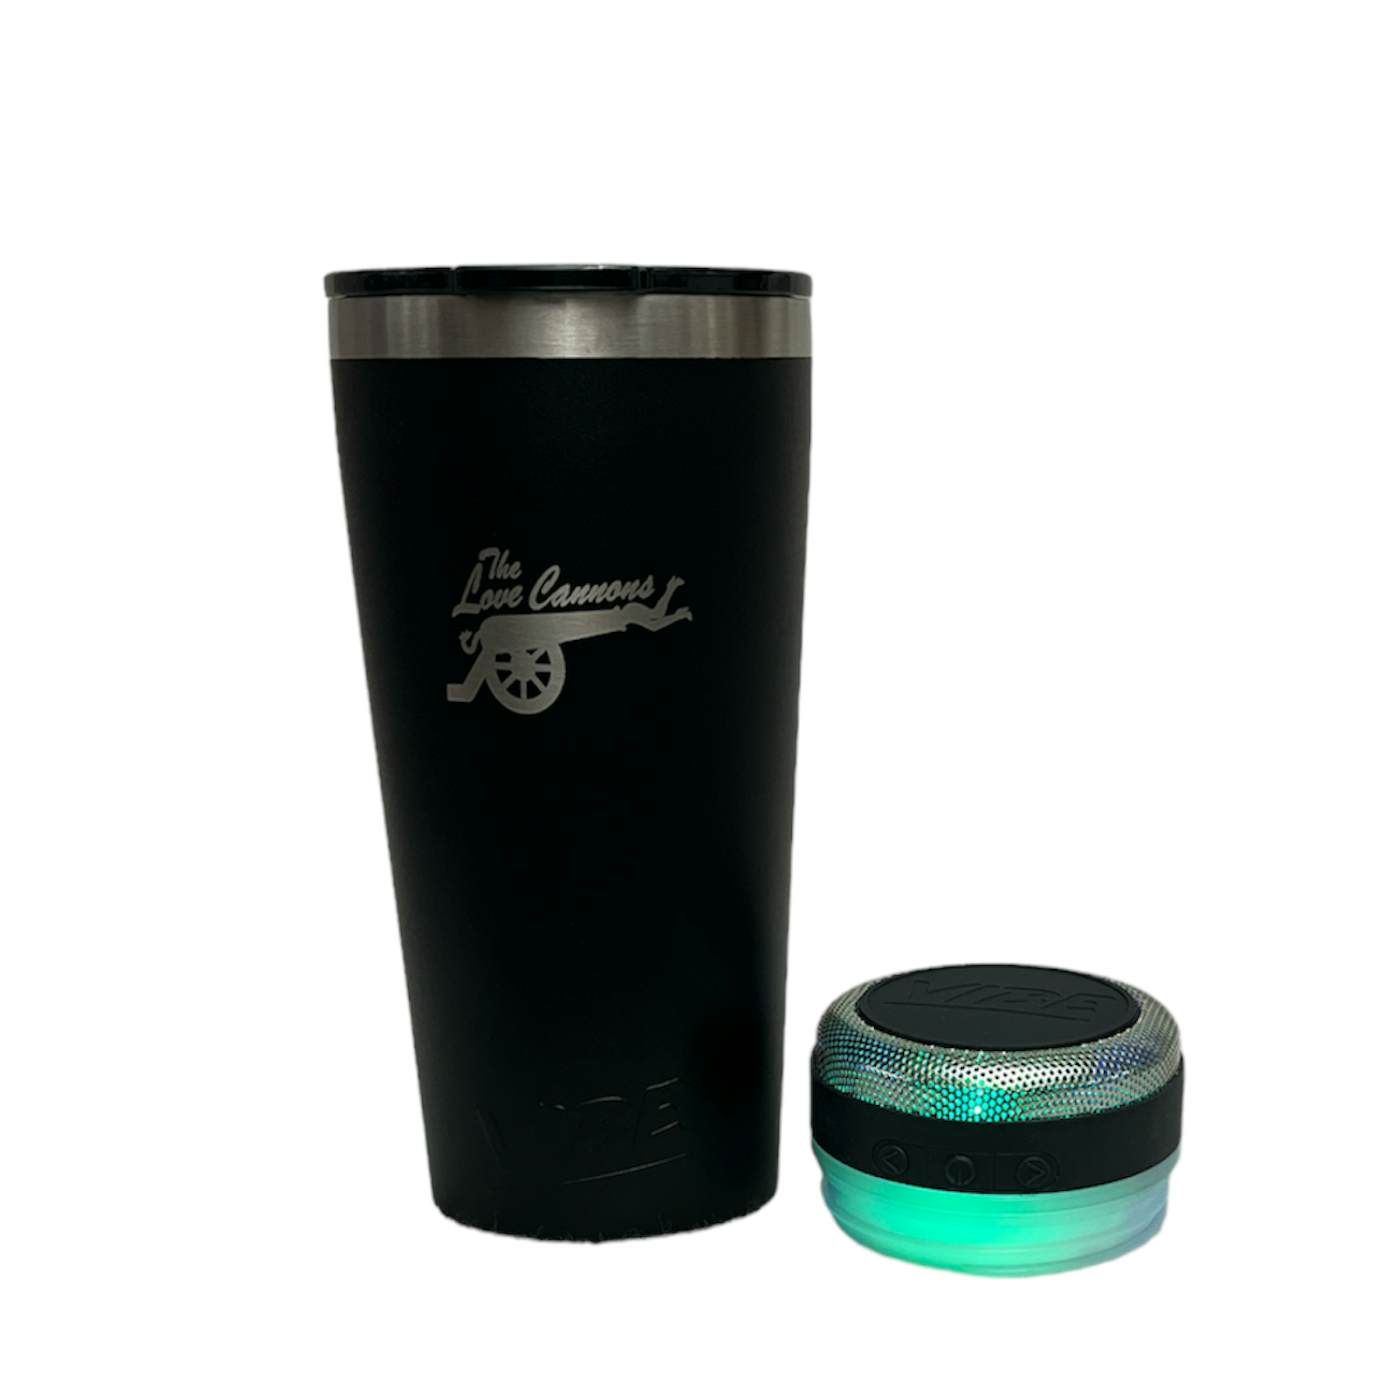 Lee Brice Wireless Speaker 18 oz. Tumbler – Richards and Southern